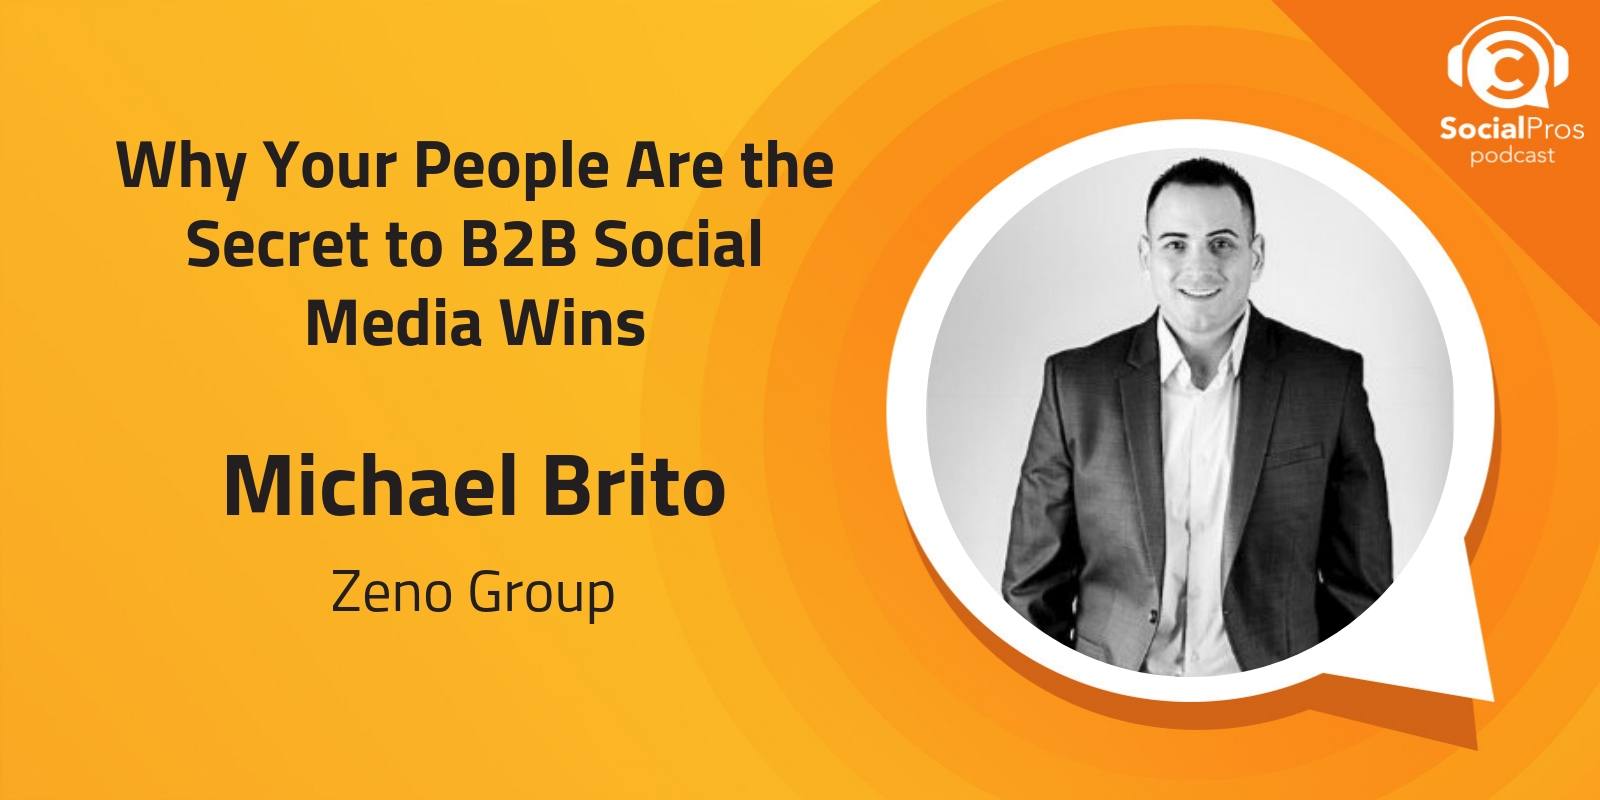 Why Your People Are the Secret to B2B Social Media Wins